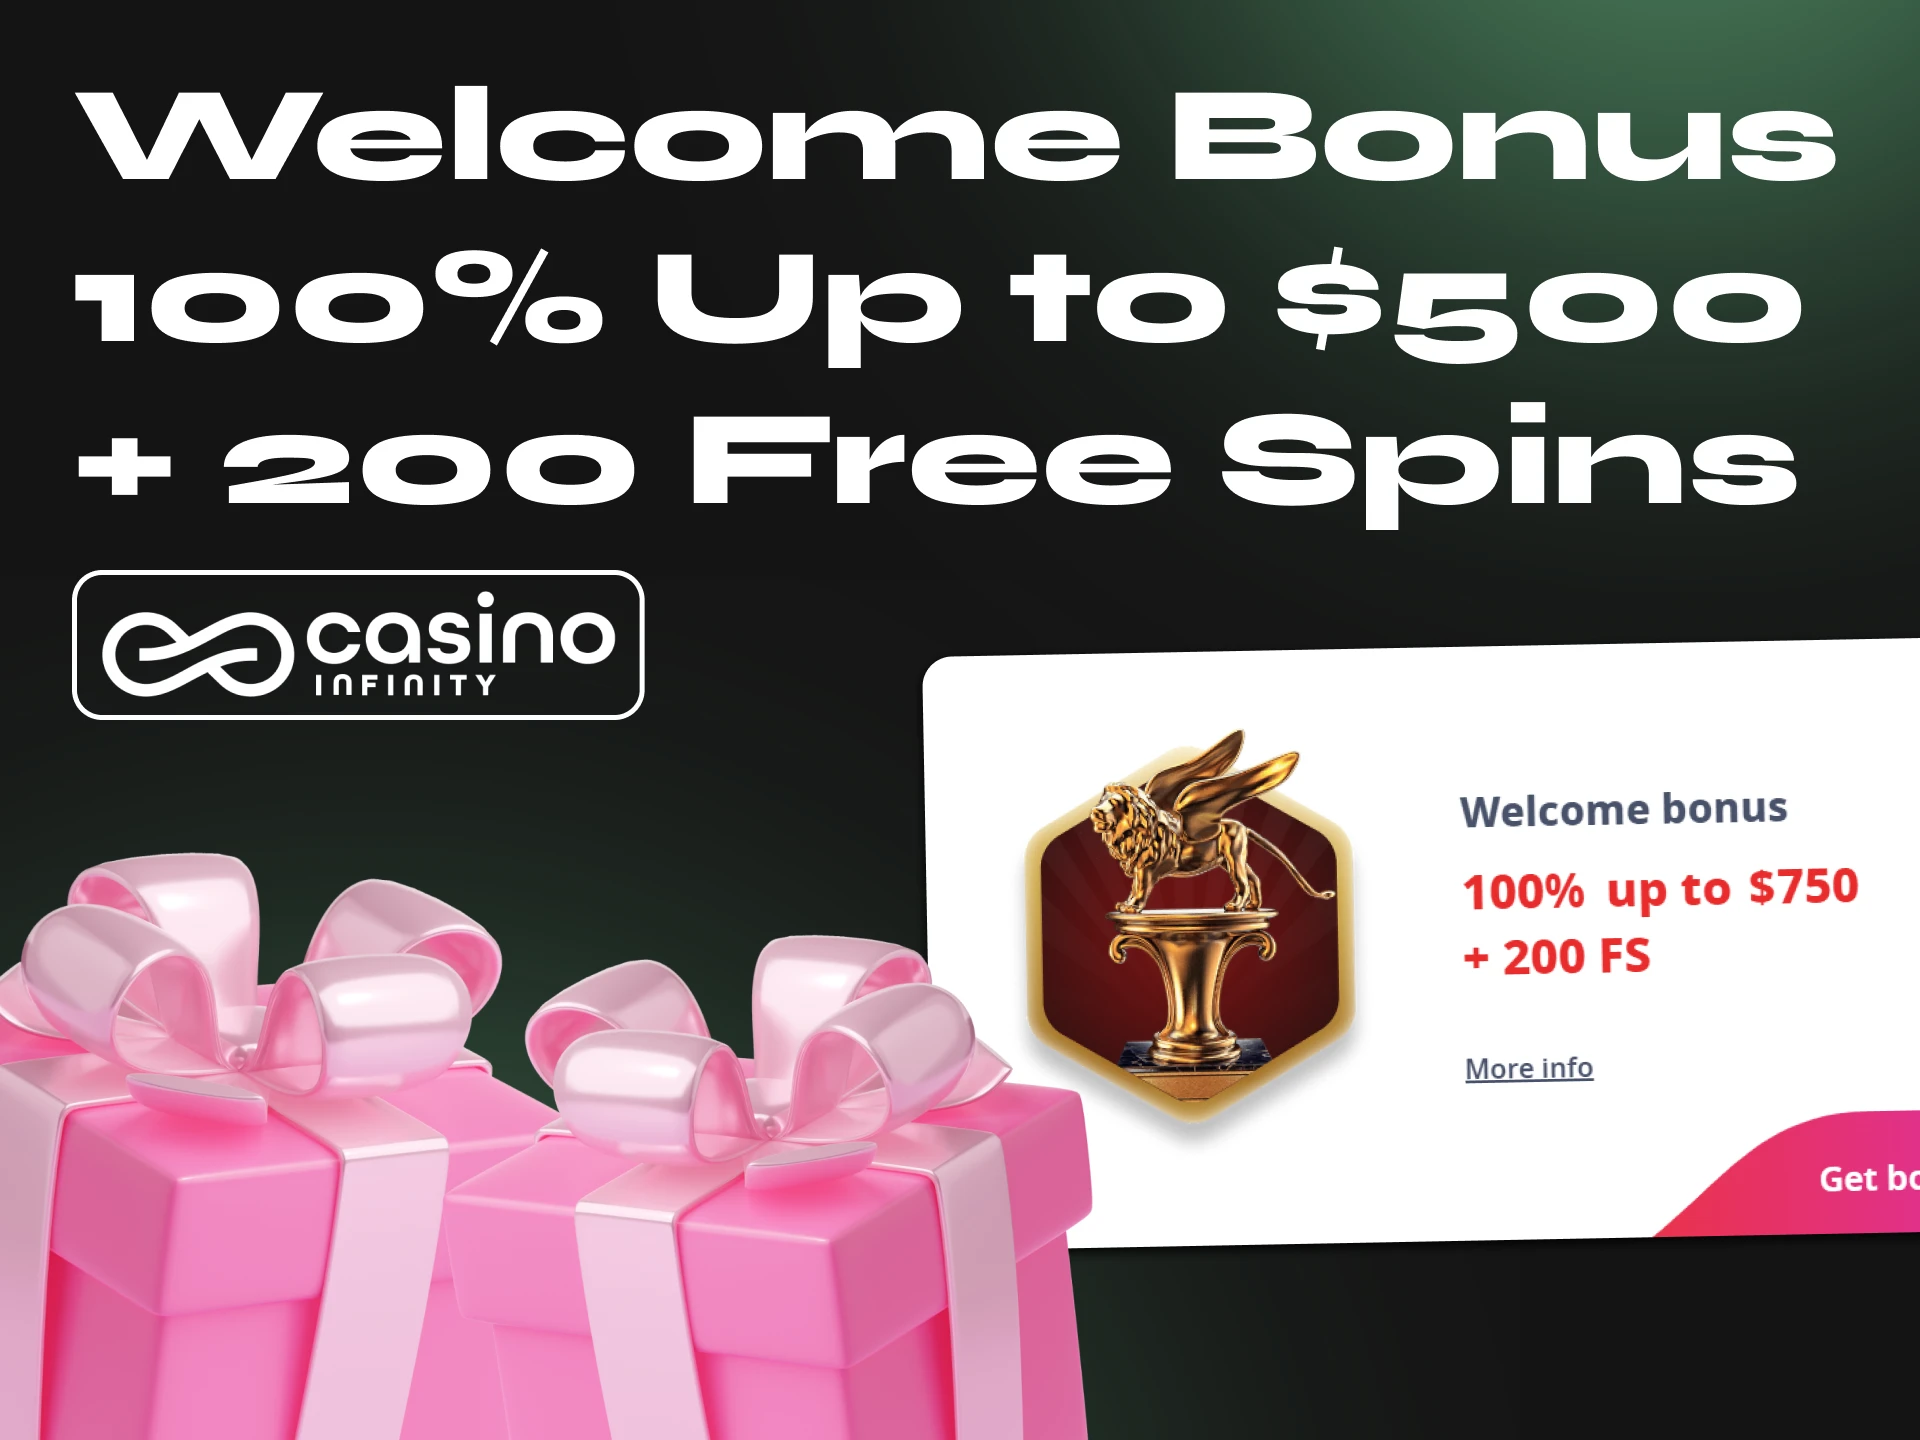 Infinity Casino provides its users with high-quality poker games and gives a welcome bonus to newcomers.